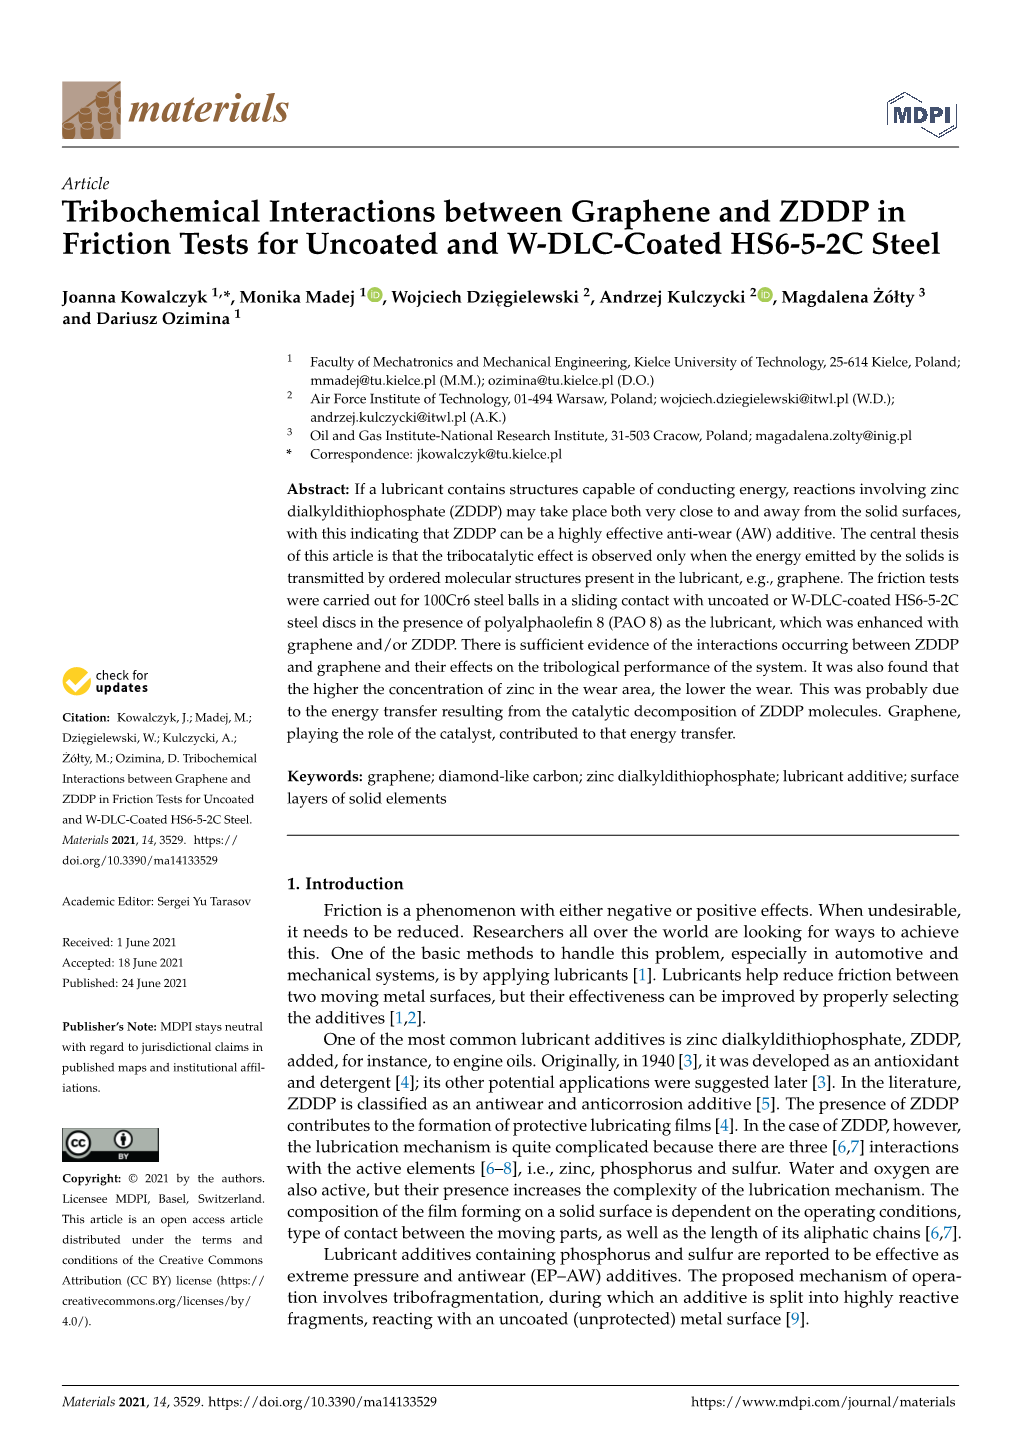 Tribochemical Interactions Between Graphene and ZDDP in Friction Tests for Uncoated and W-DLC-Coated HS6-5-2C Steel